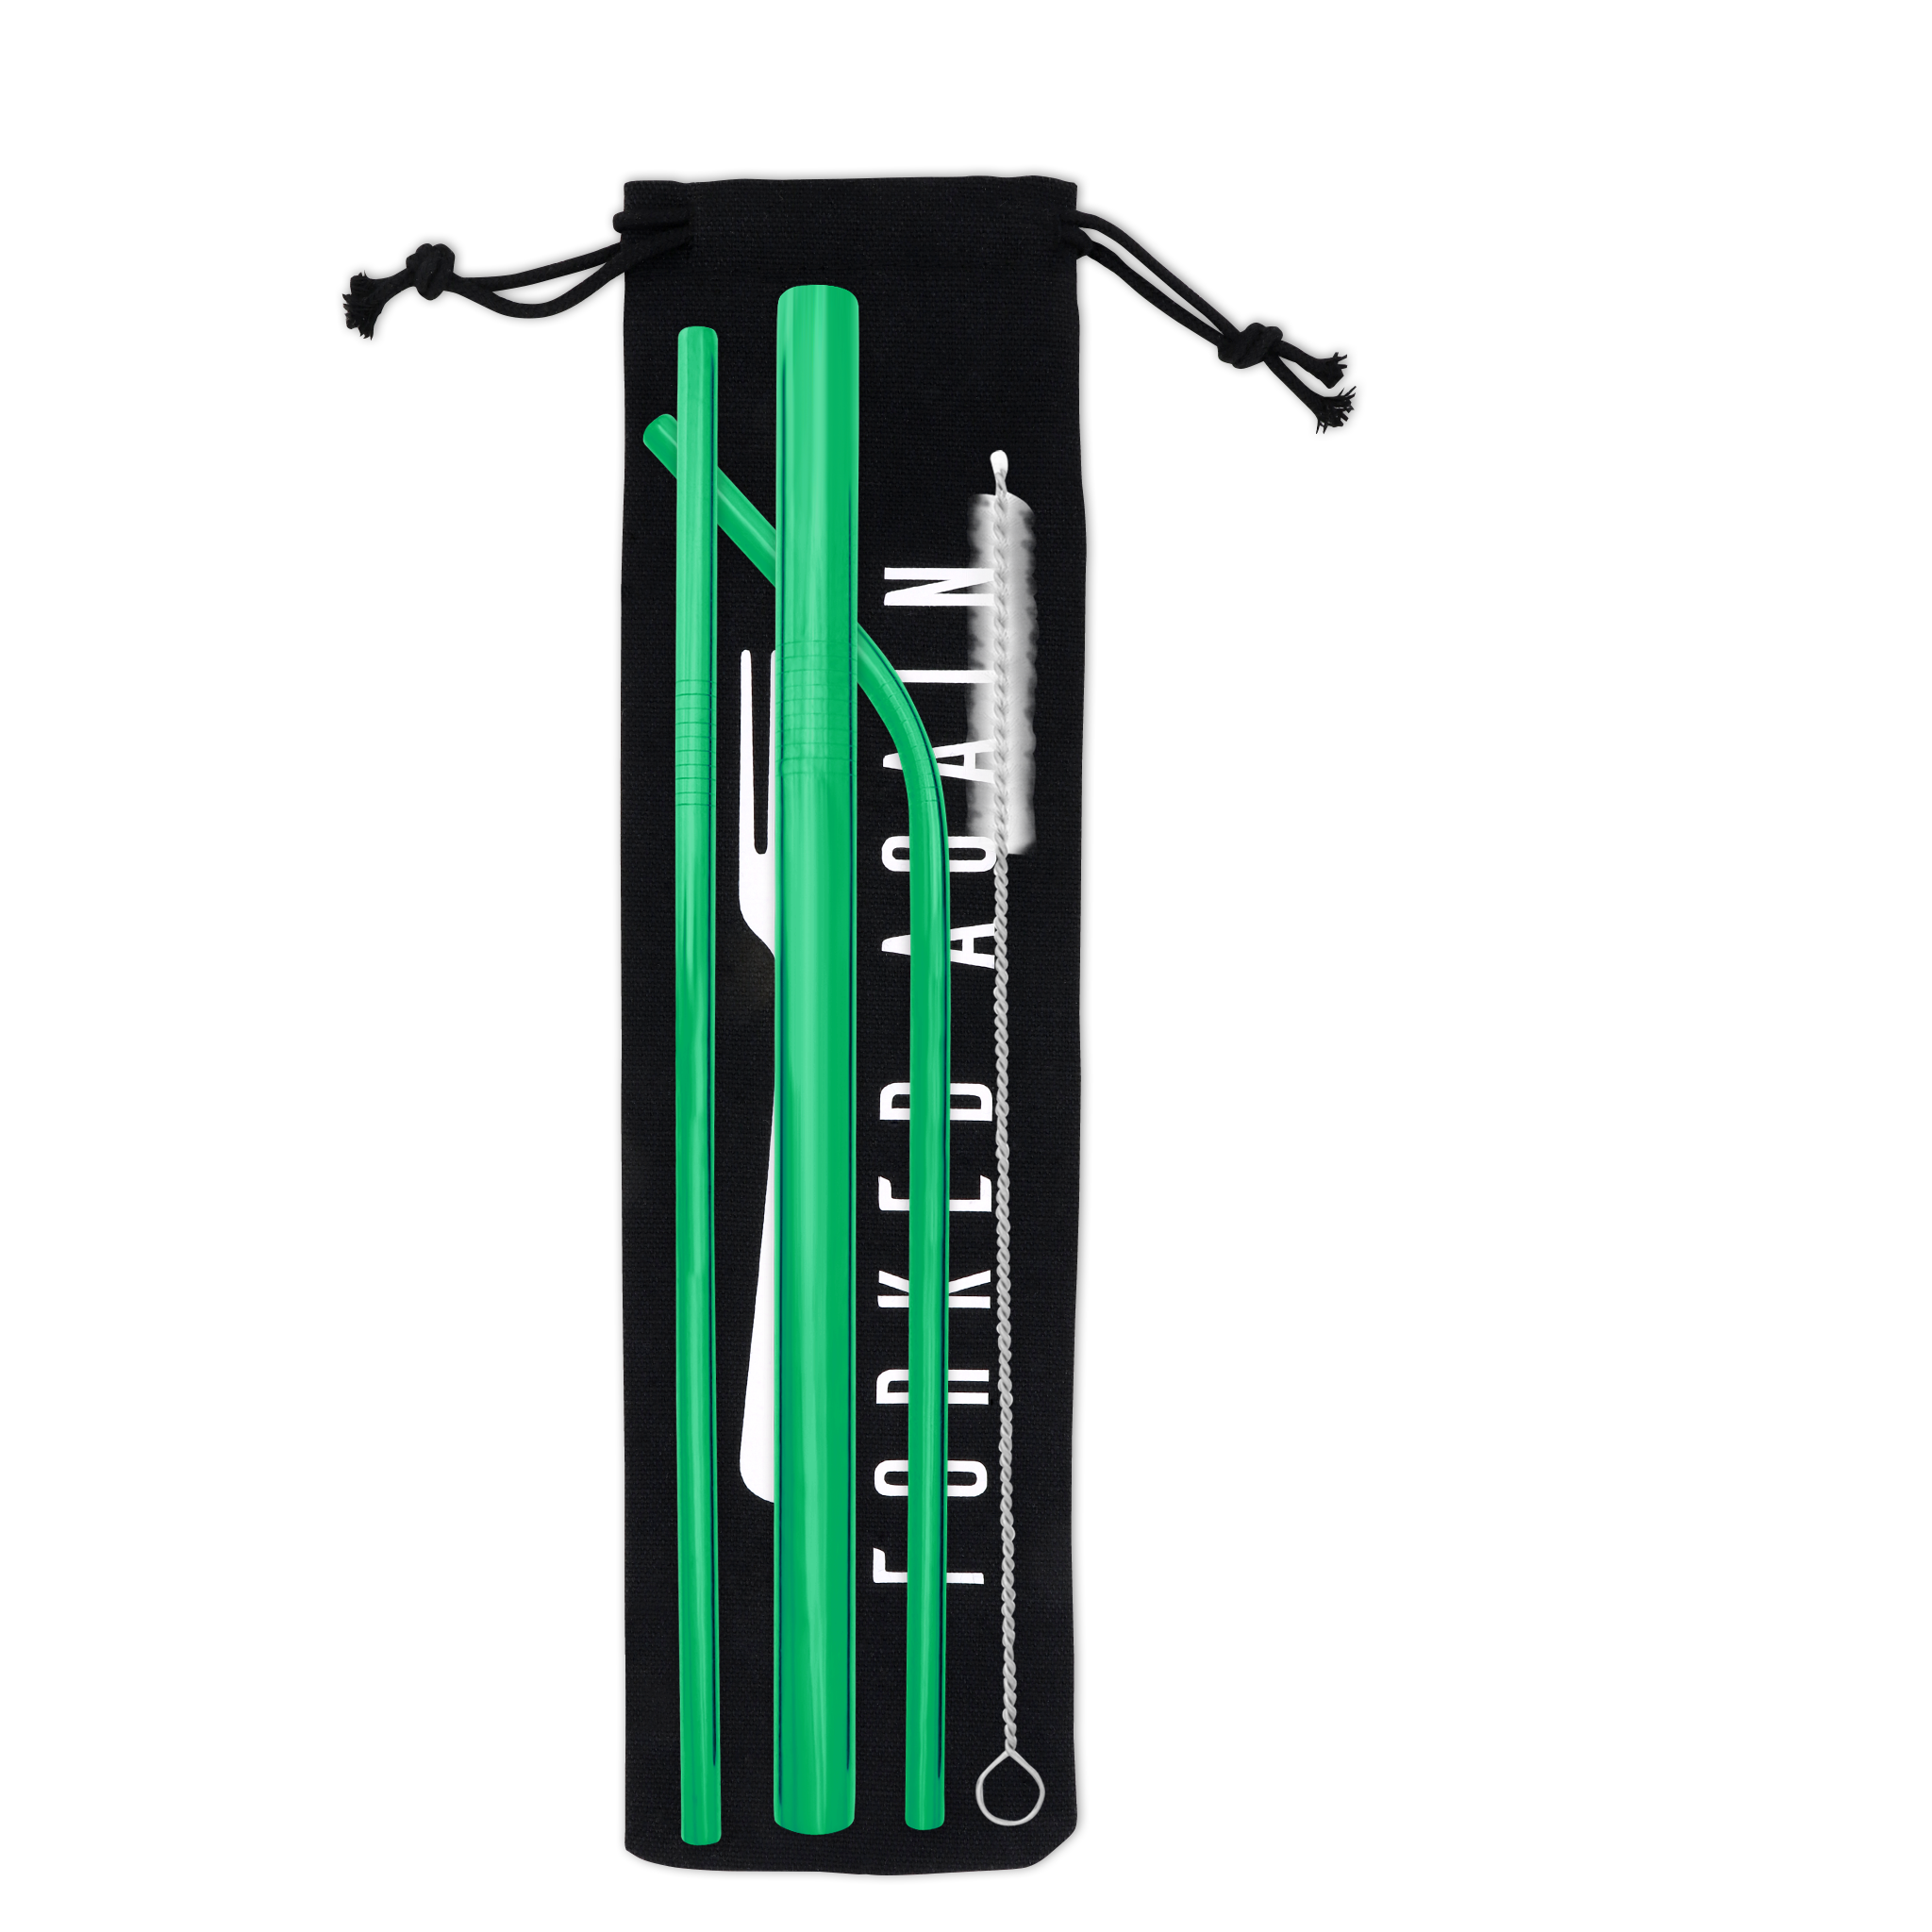 Triple Threat Stainless Steel Straw Set with Travel Pouch (Green)